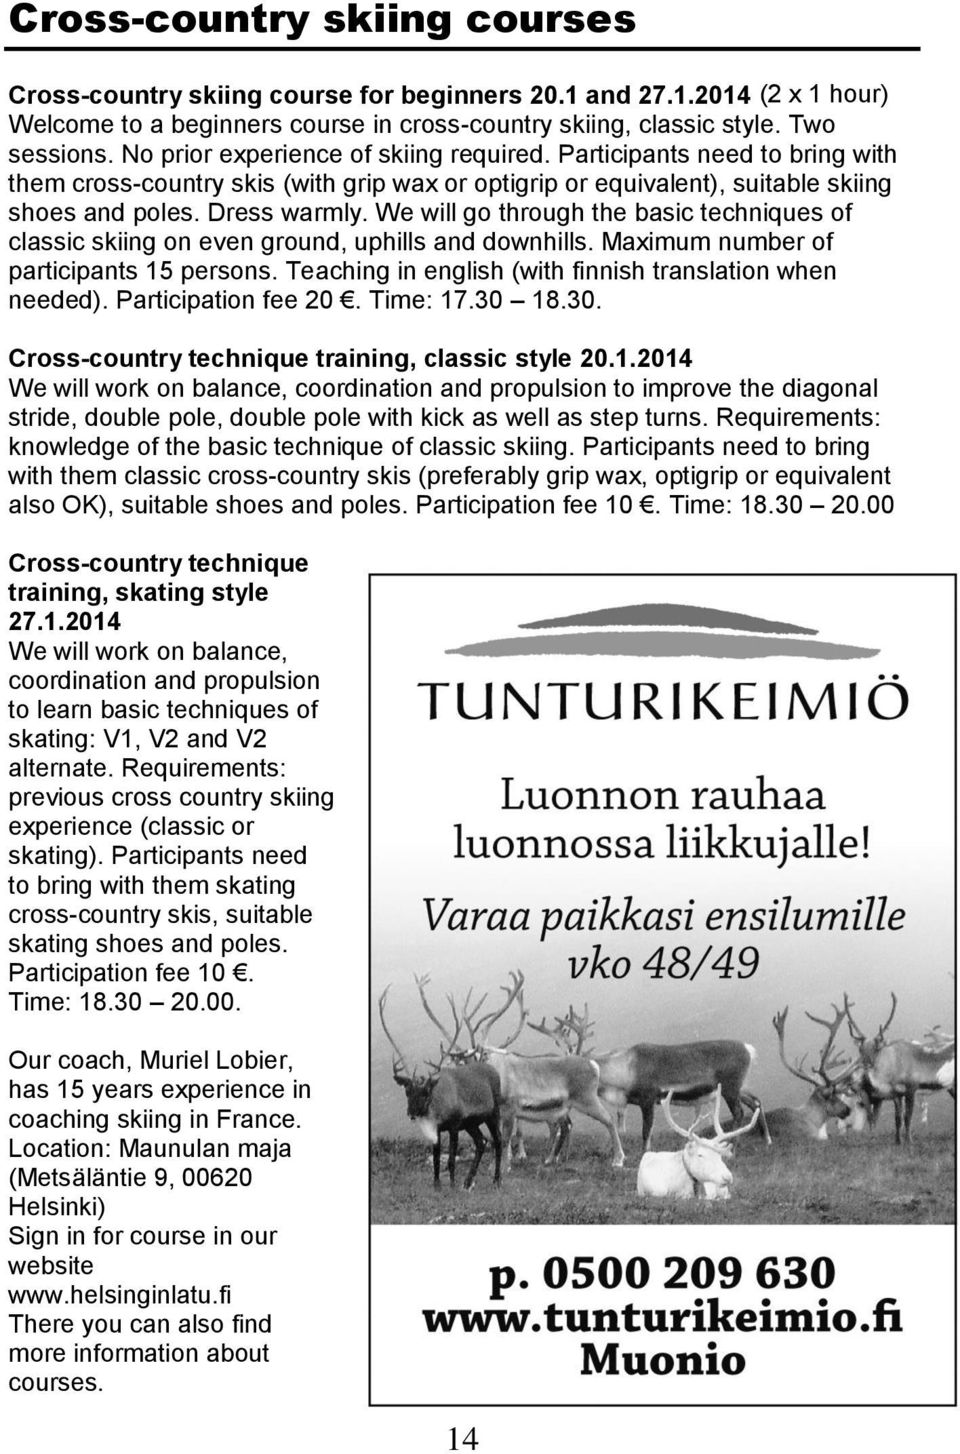 We will go through the basic techniques of classic skiing on even ground, uphills and downhills. Maximum number of participants 15 persons. Teaching in english (with finnish translation when needed).